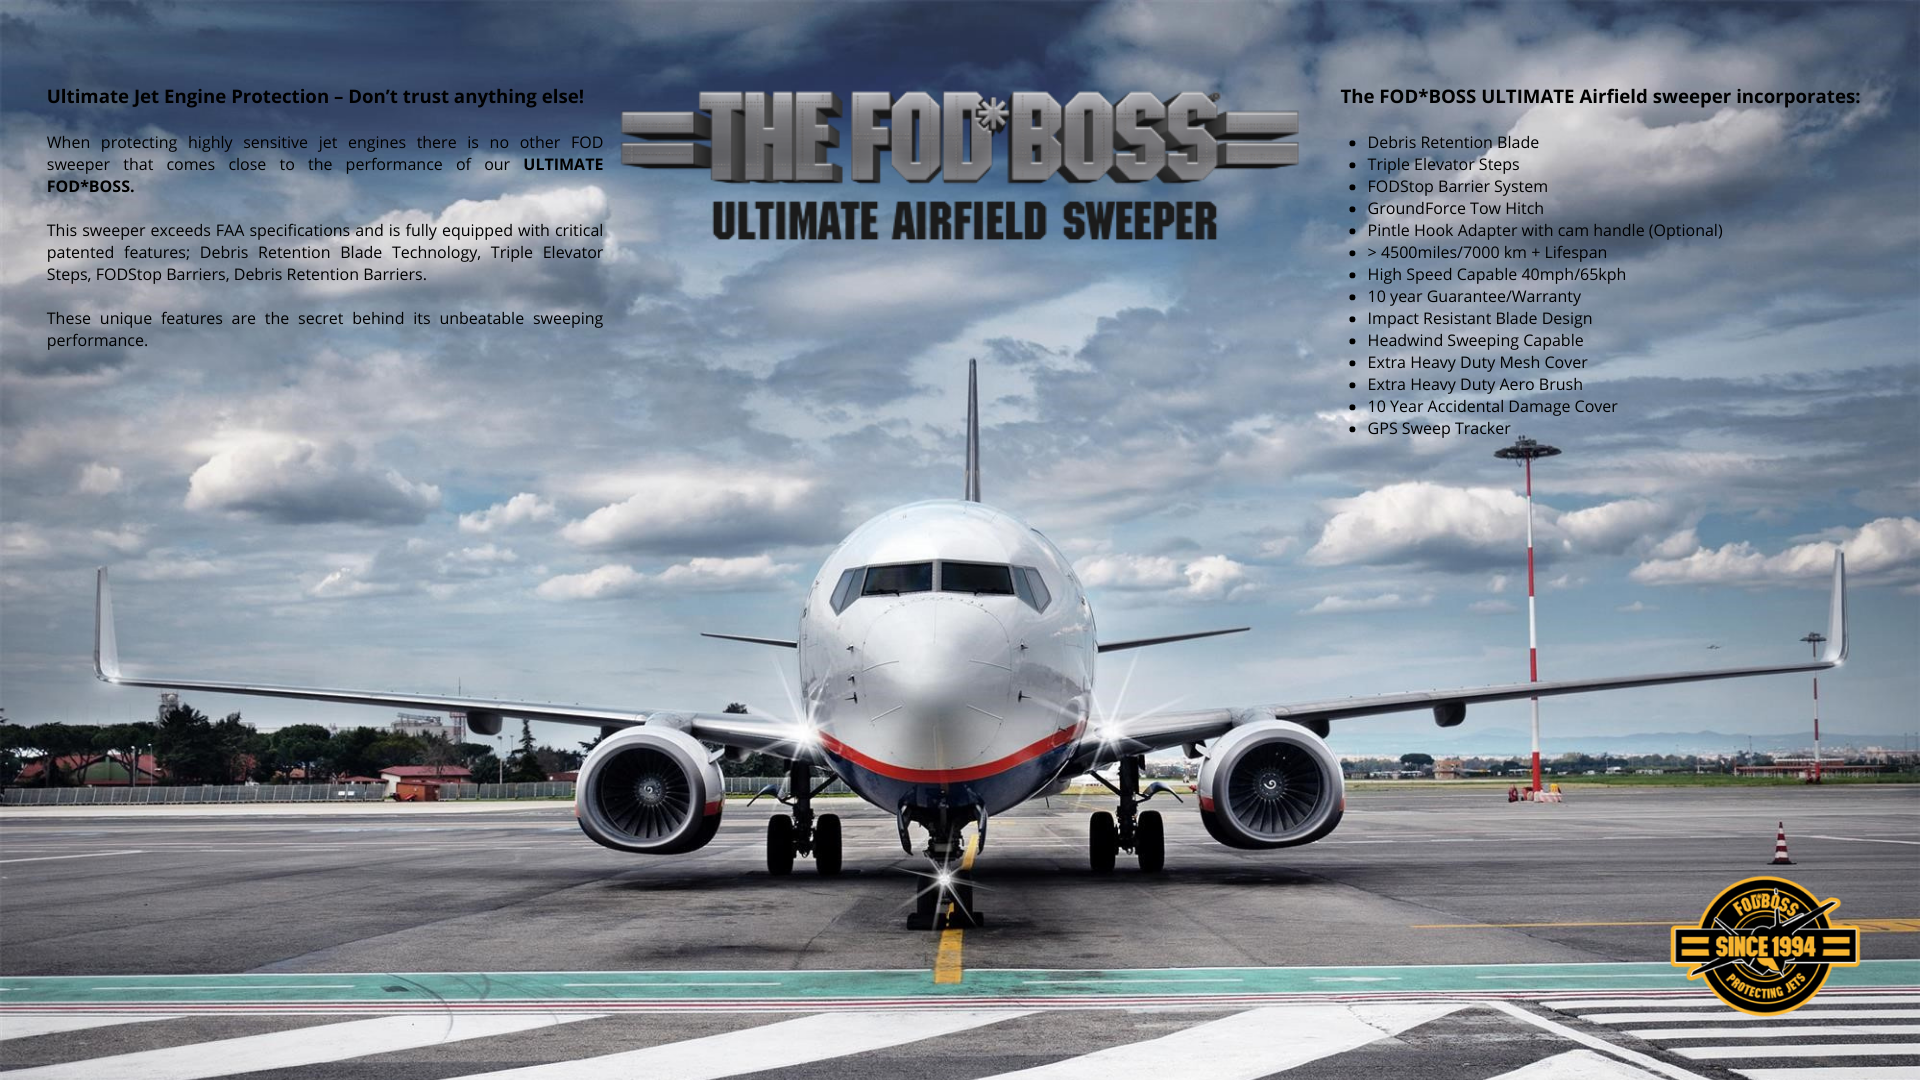 The Fod Boss Ultimate Air Field Sweeper